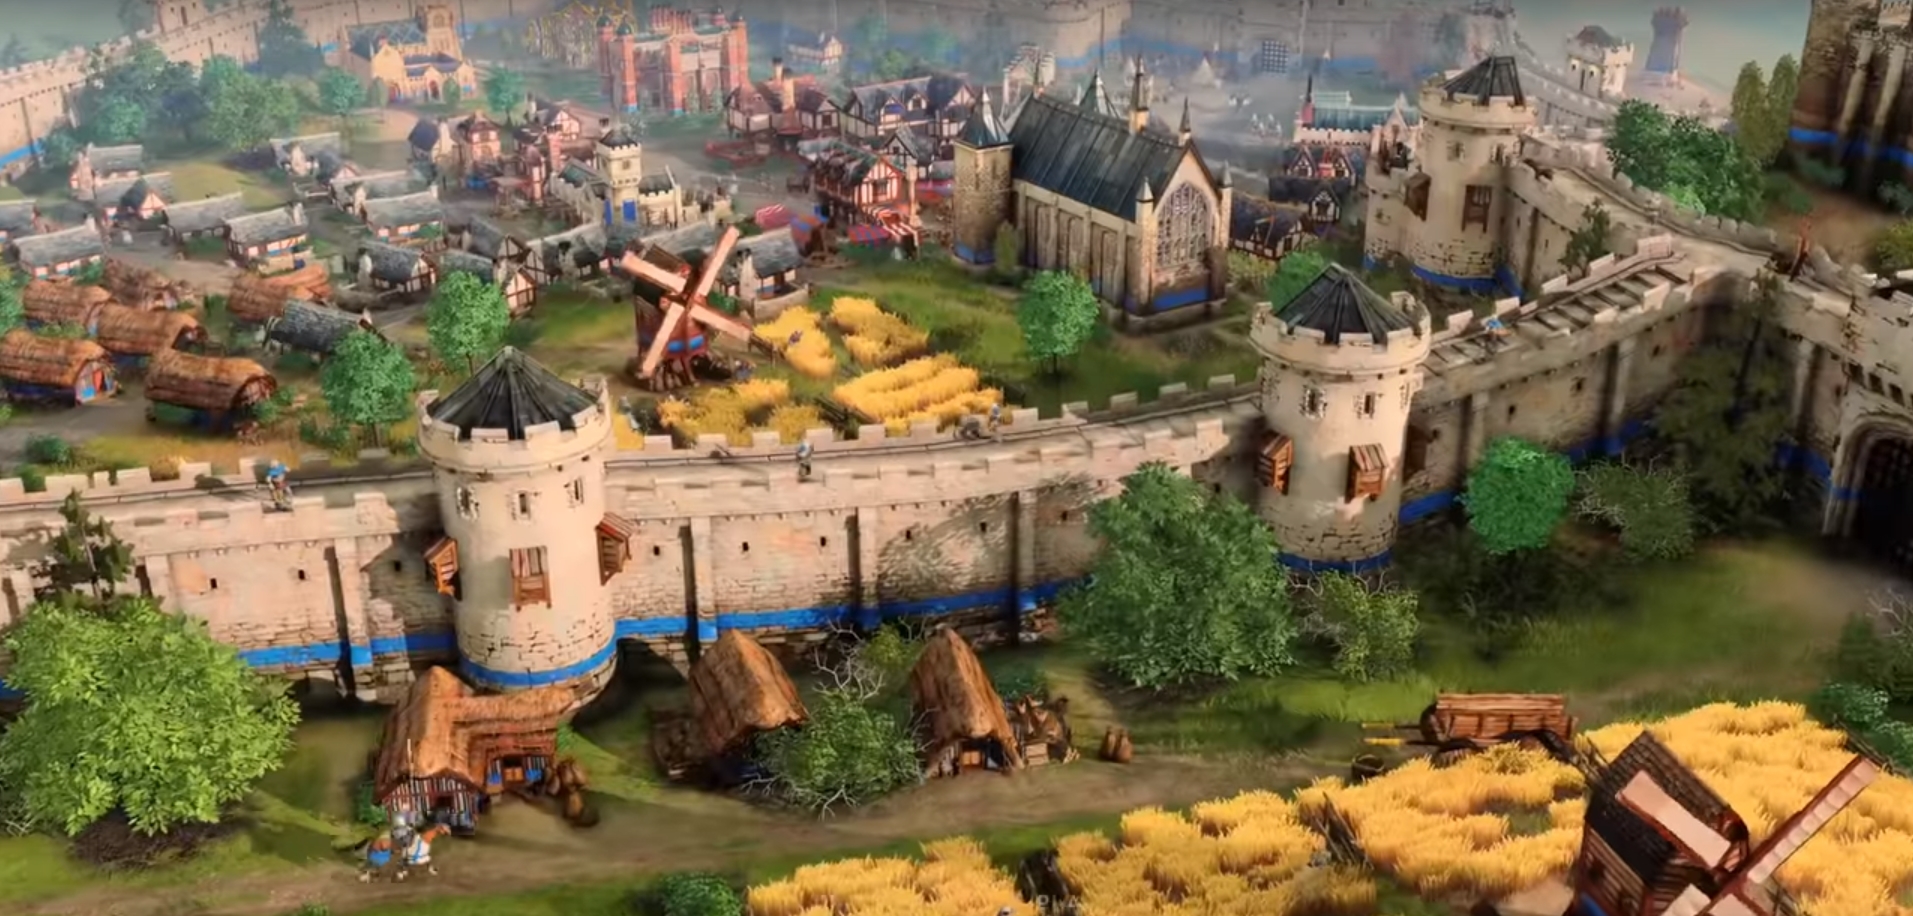 Rumors Arise That Age of Empires IV Developers Intend To Bring The Game To Consoles